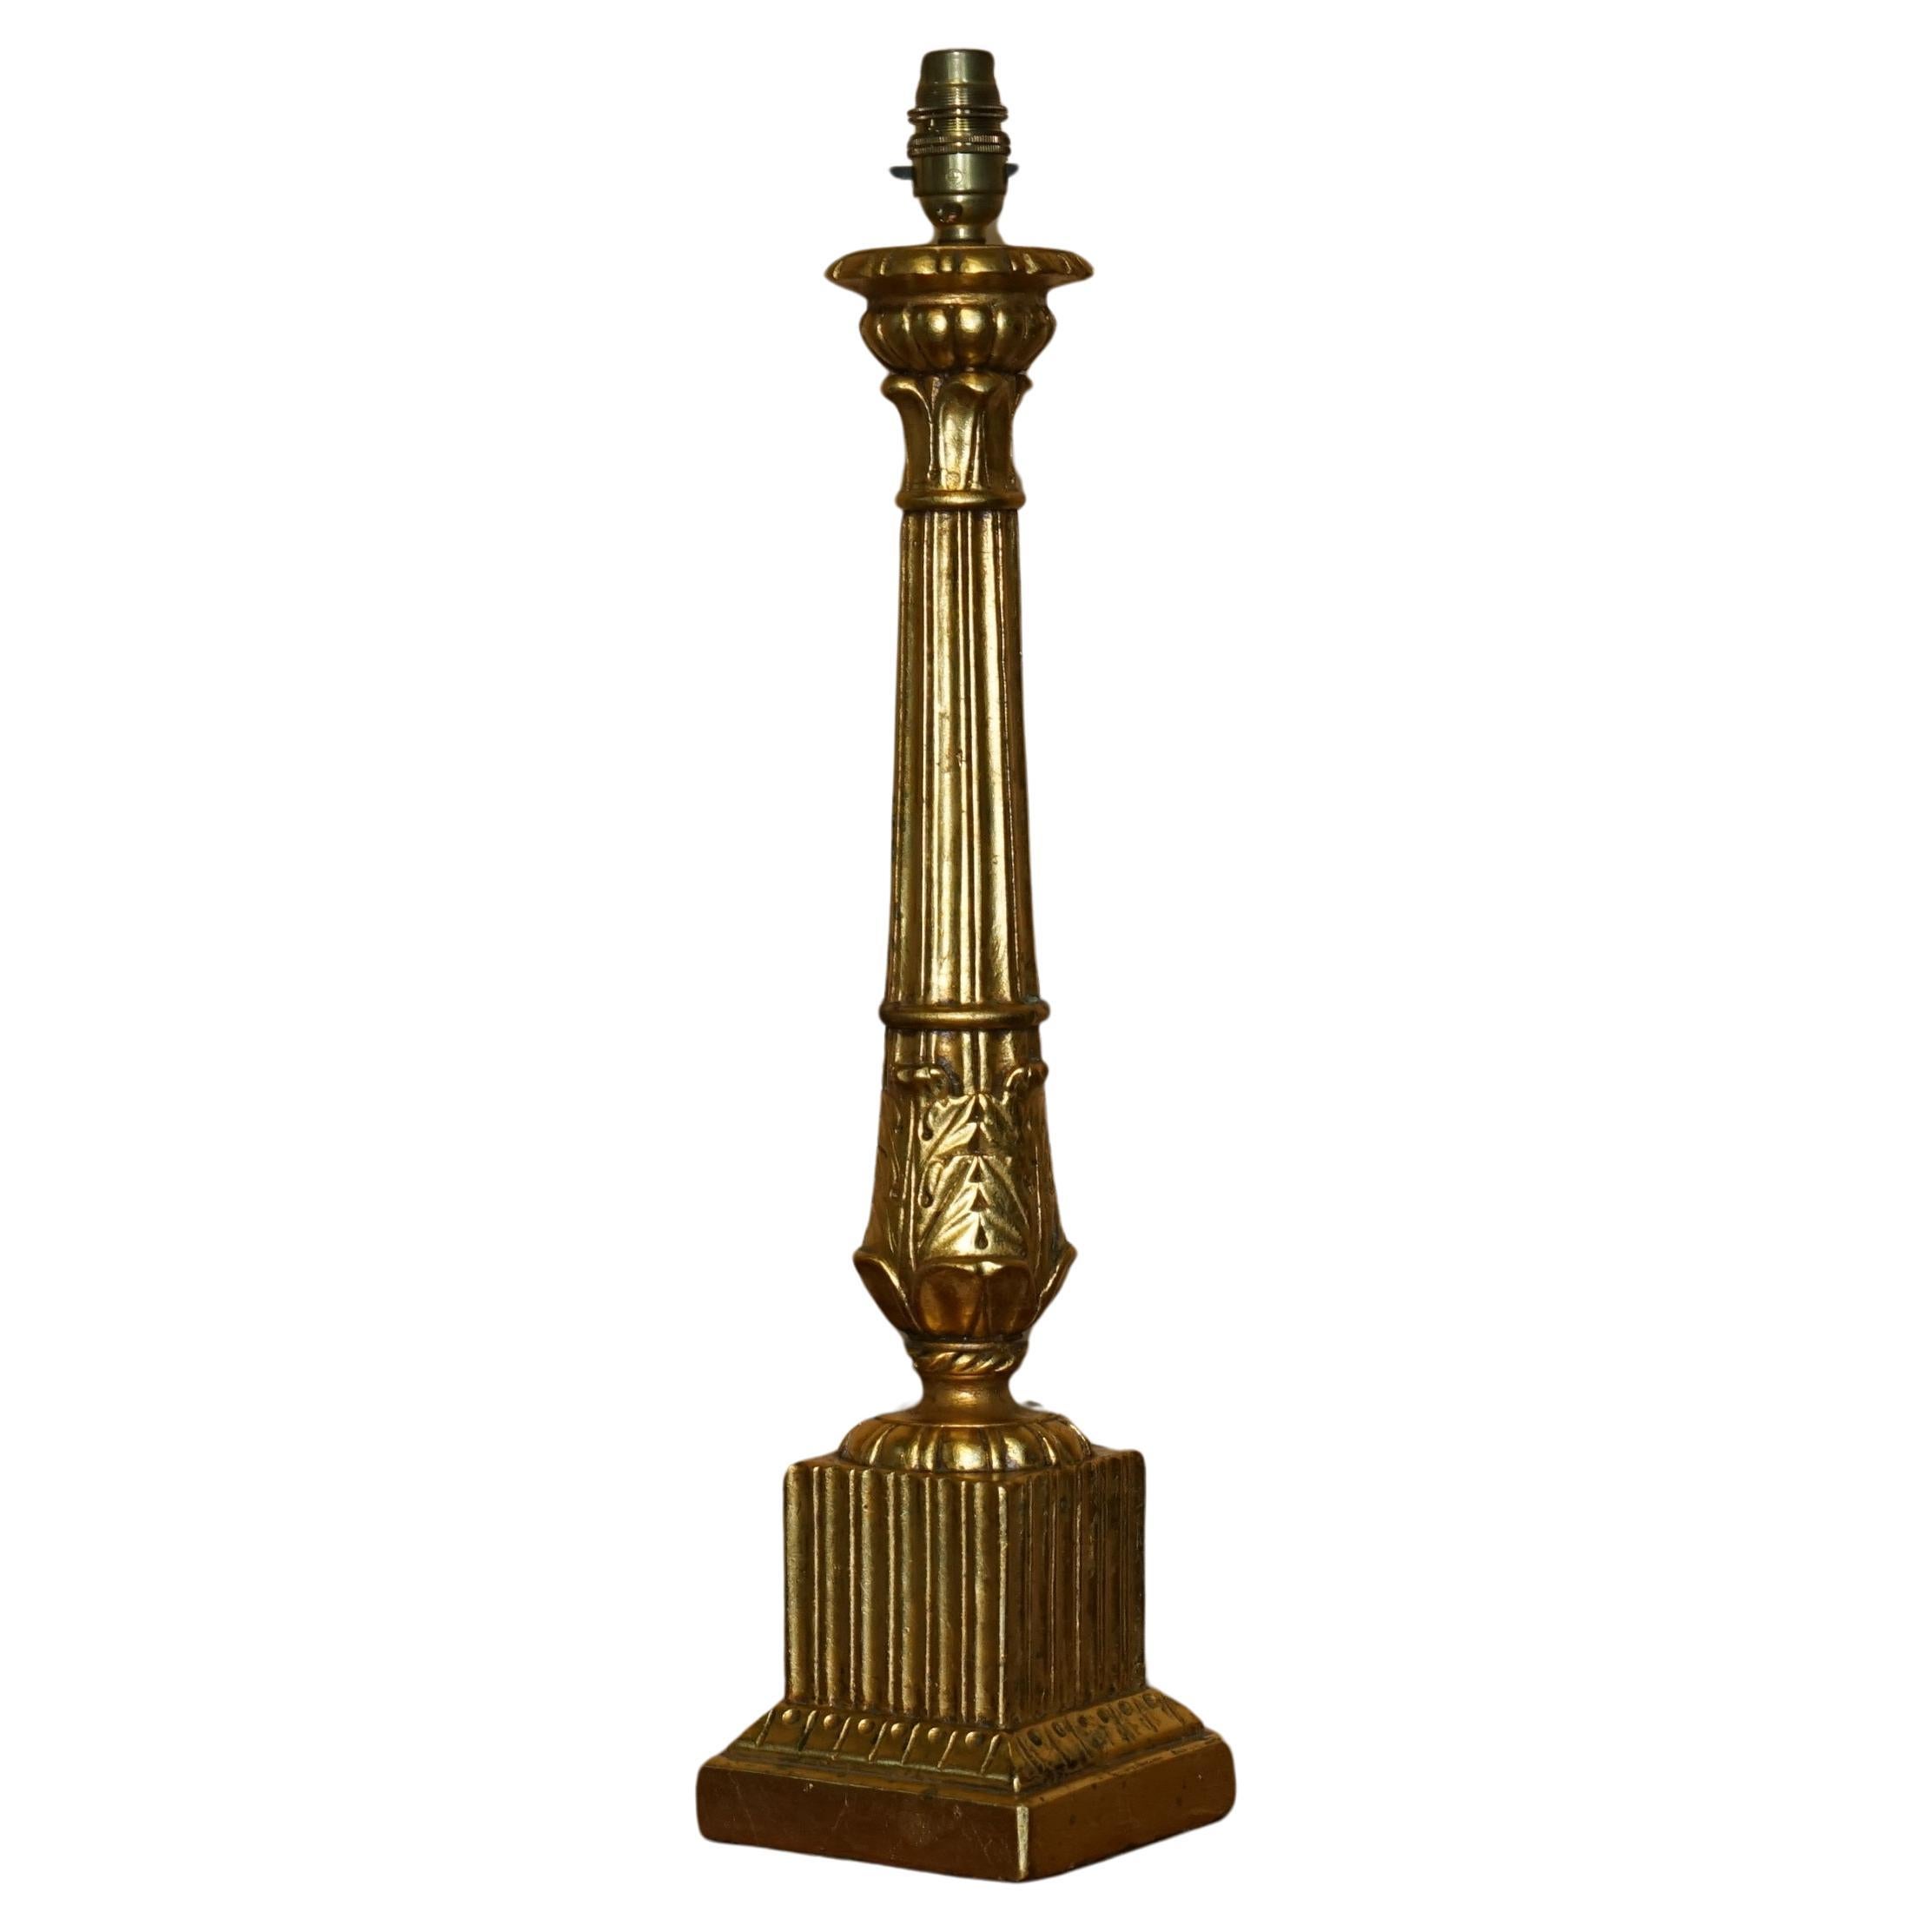 LOVELY HAND CARVED GOLD GiLTWOOD CORINTHIAN PILLAR TABLE LAMP FULLY SERVICED For Sale